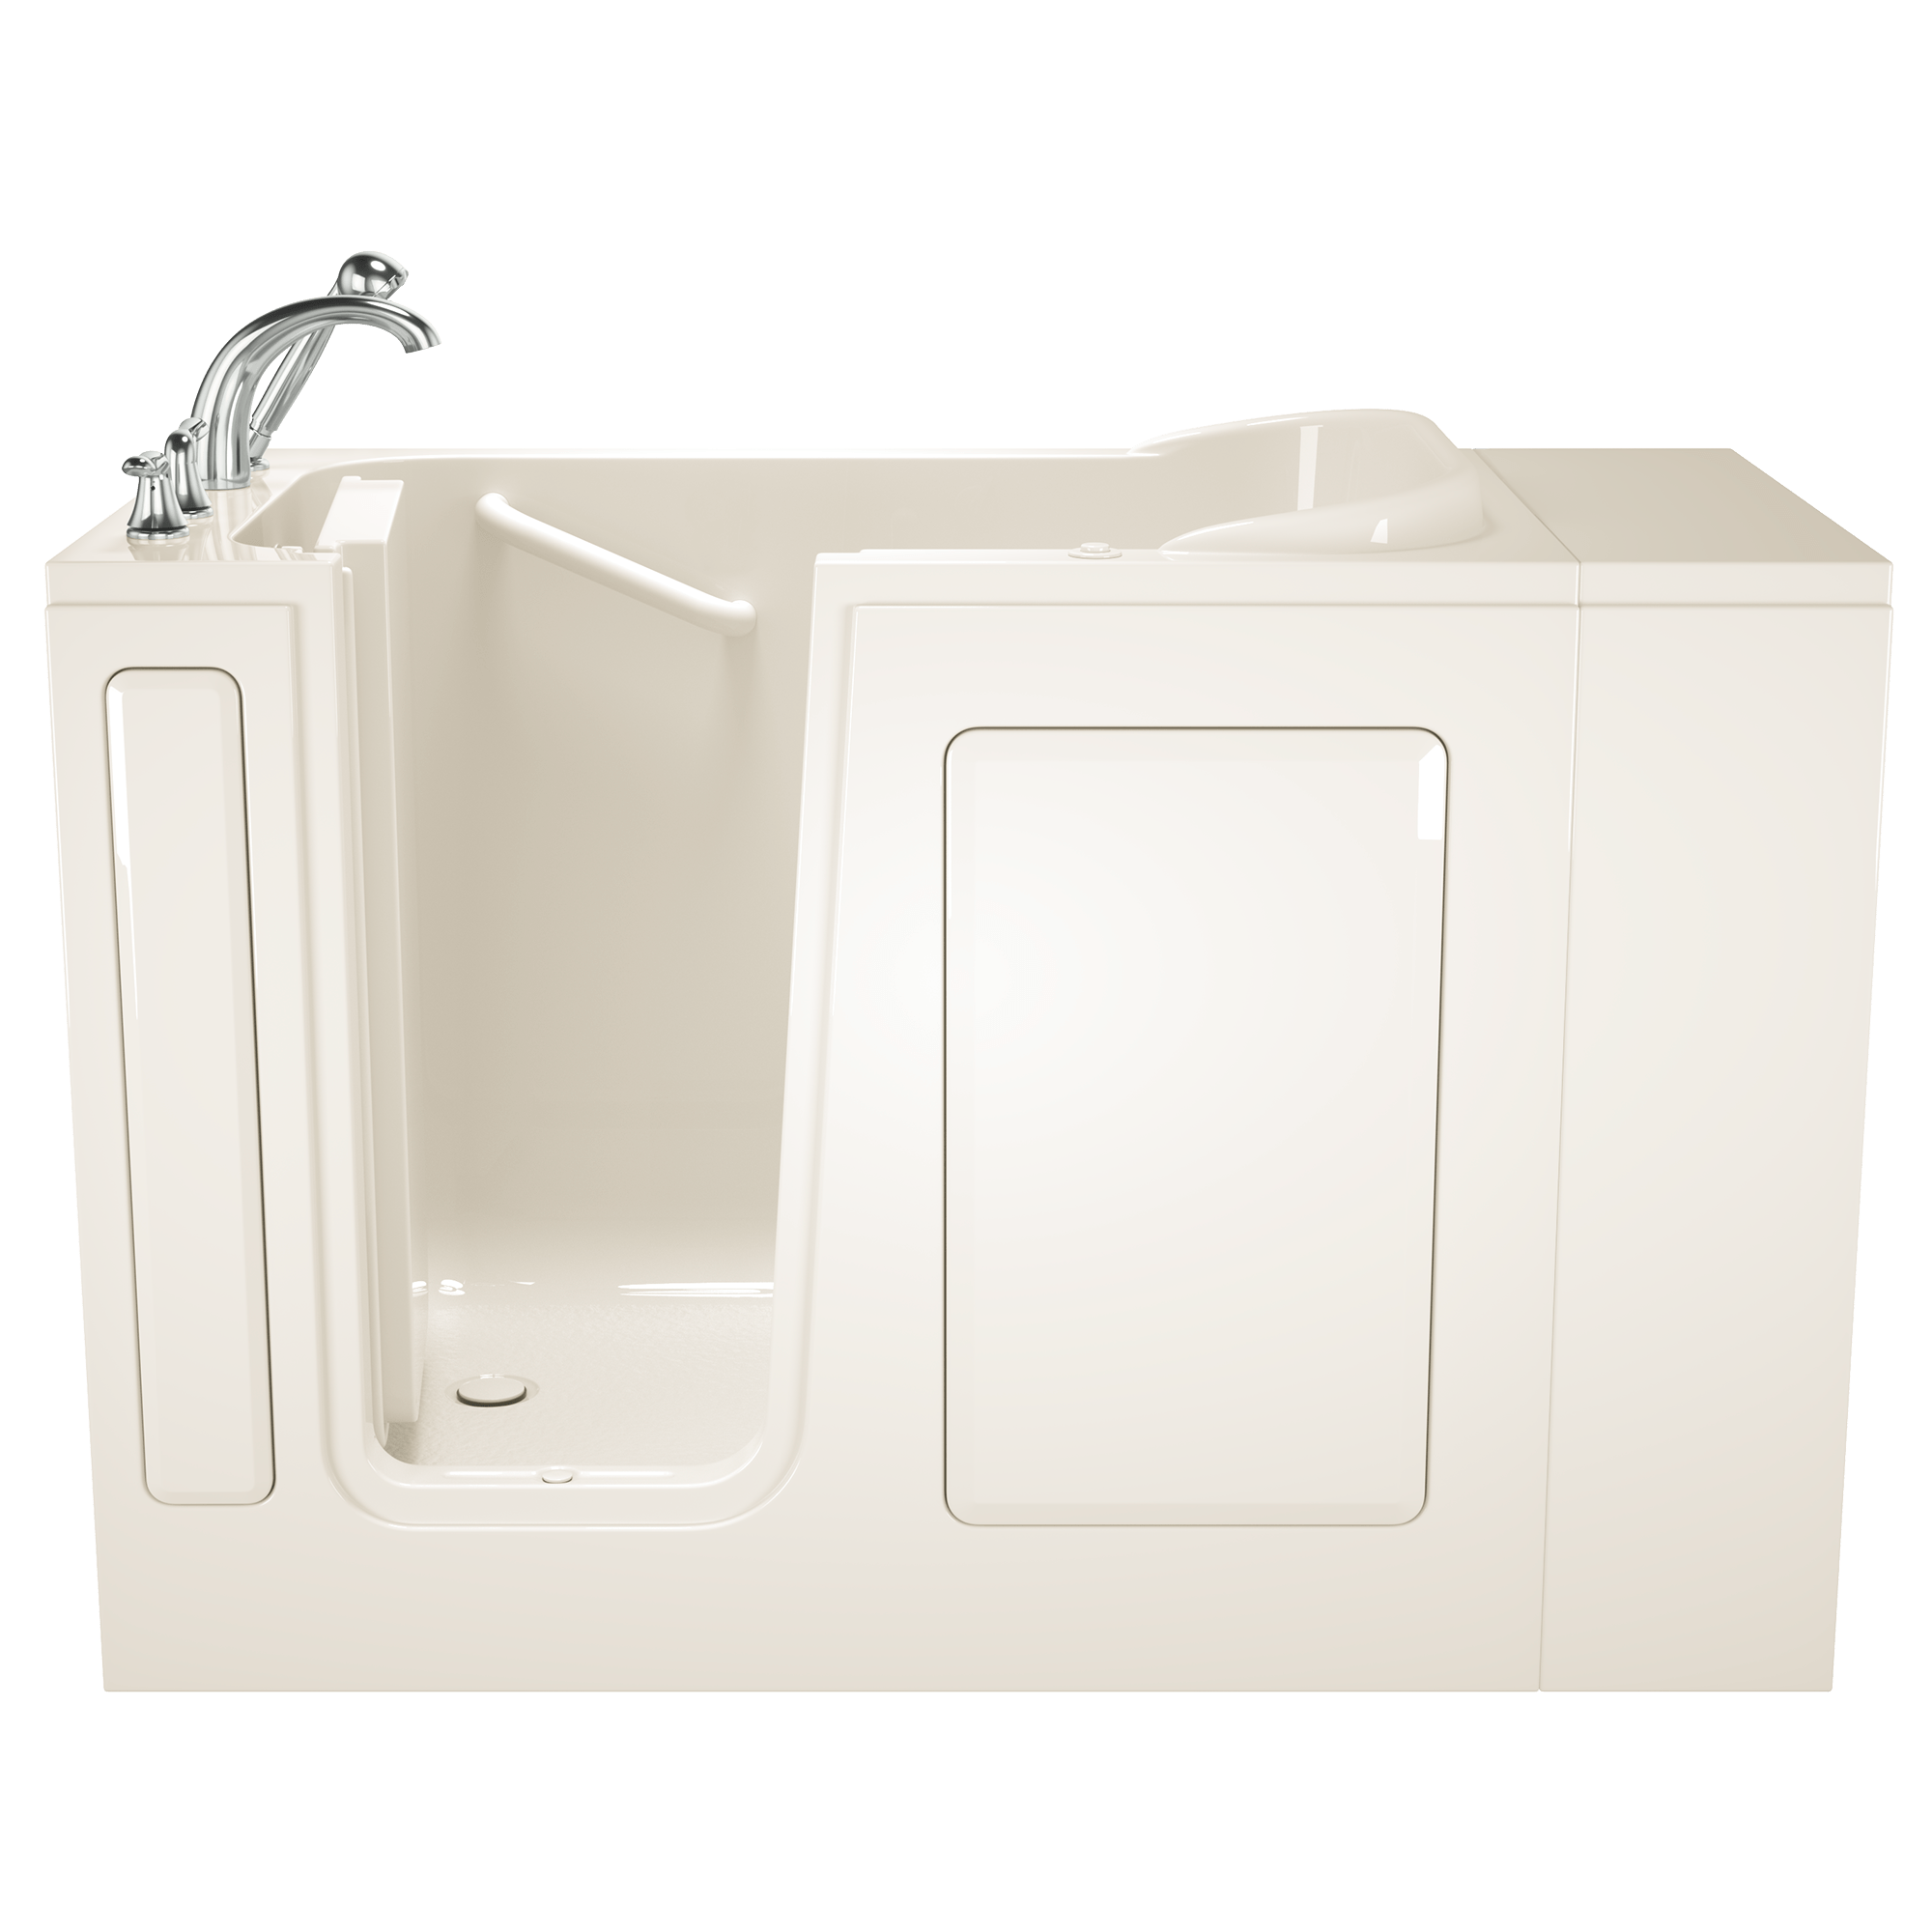 Gelcoat Entry Series 48 x 28-Inch Walk-In Tub With Air Spa System – Left-Hand Drain With Faucet